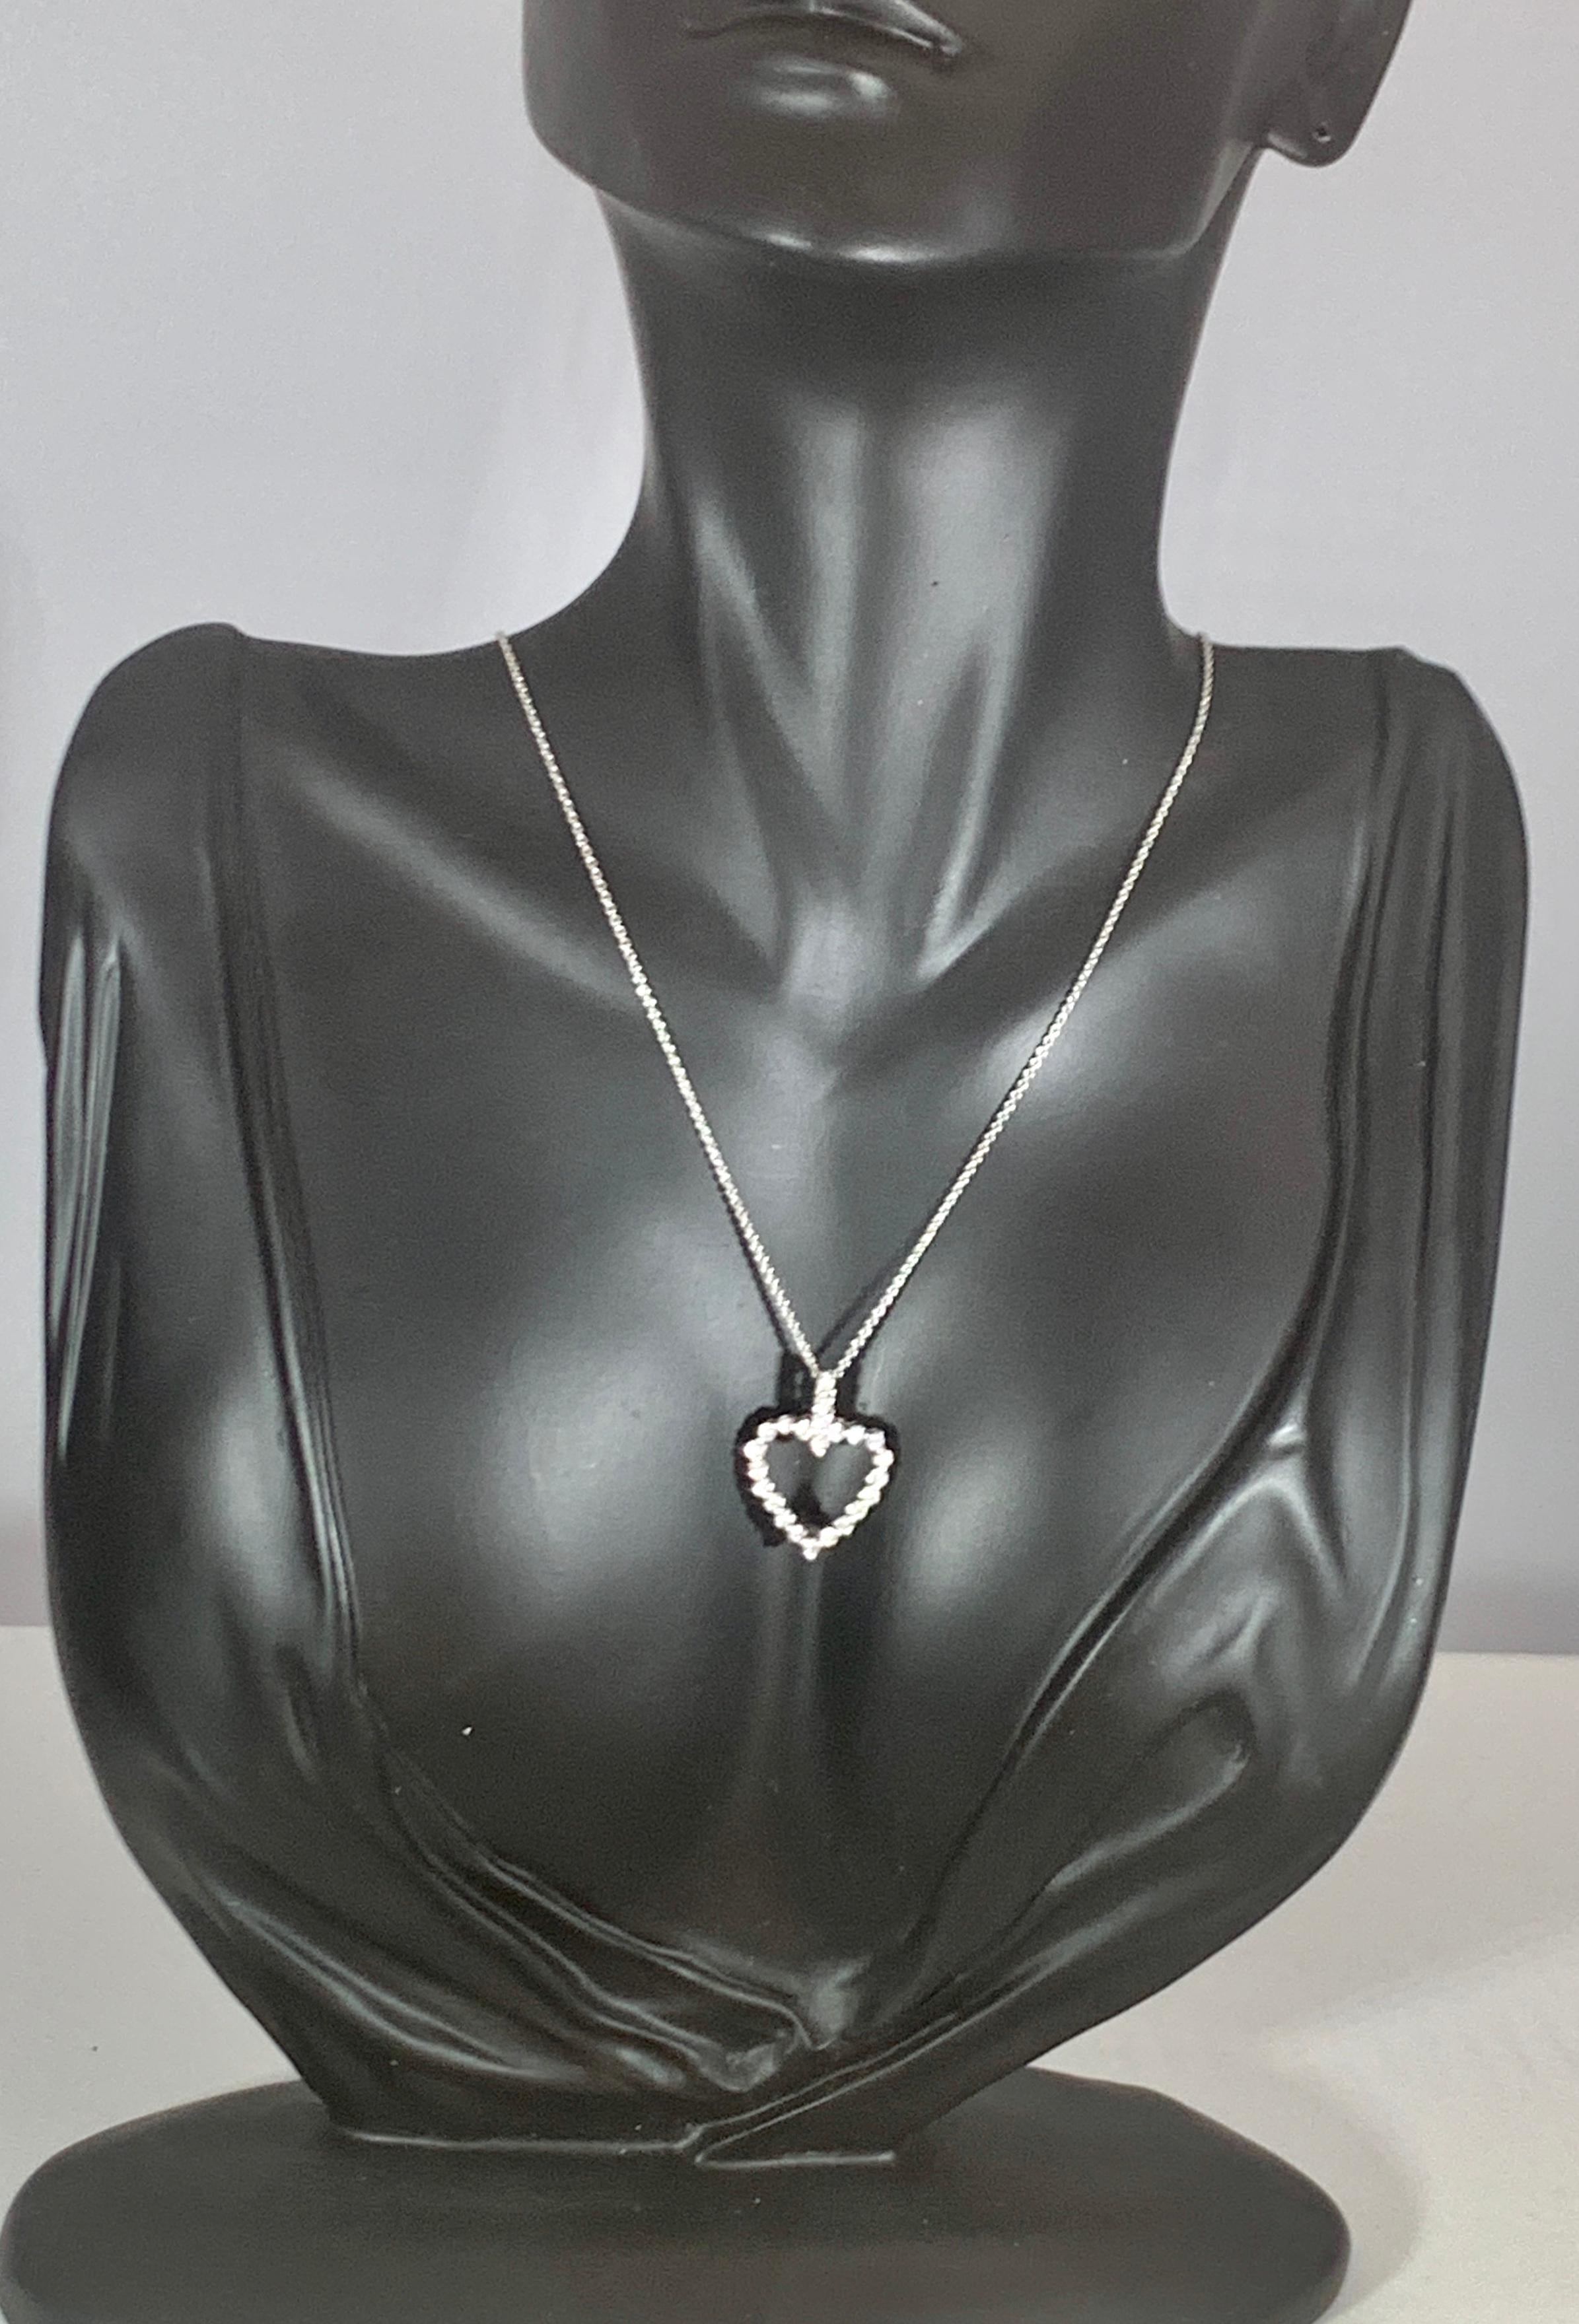 1 Carat Diamond Heart Pendant/ Necklace 14 Karat White Gold with Chain For Sale 2